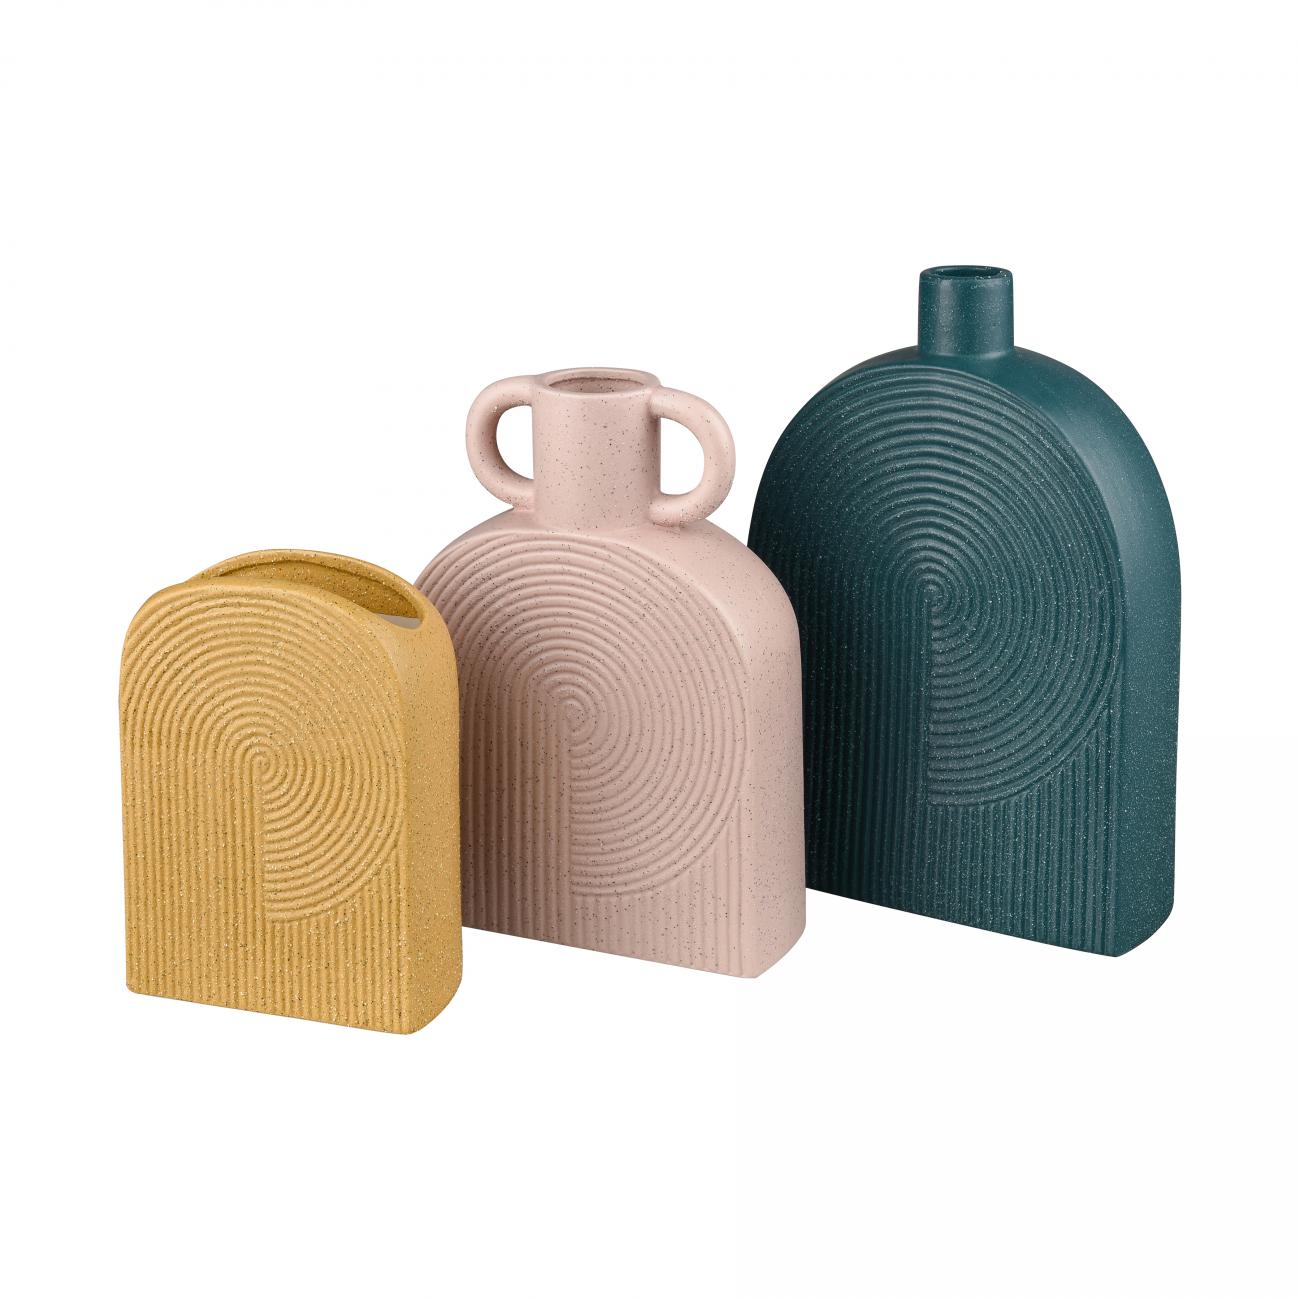 The Agna Vases from Elk Home